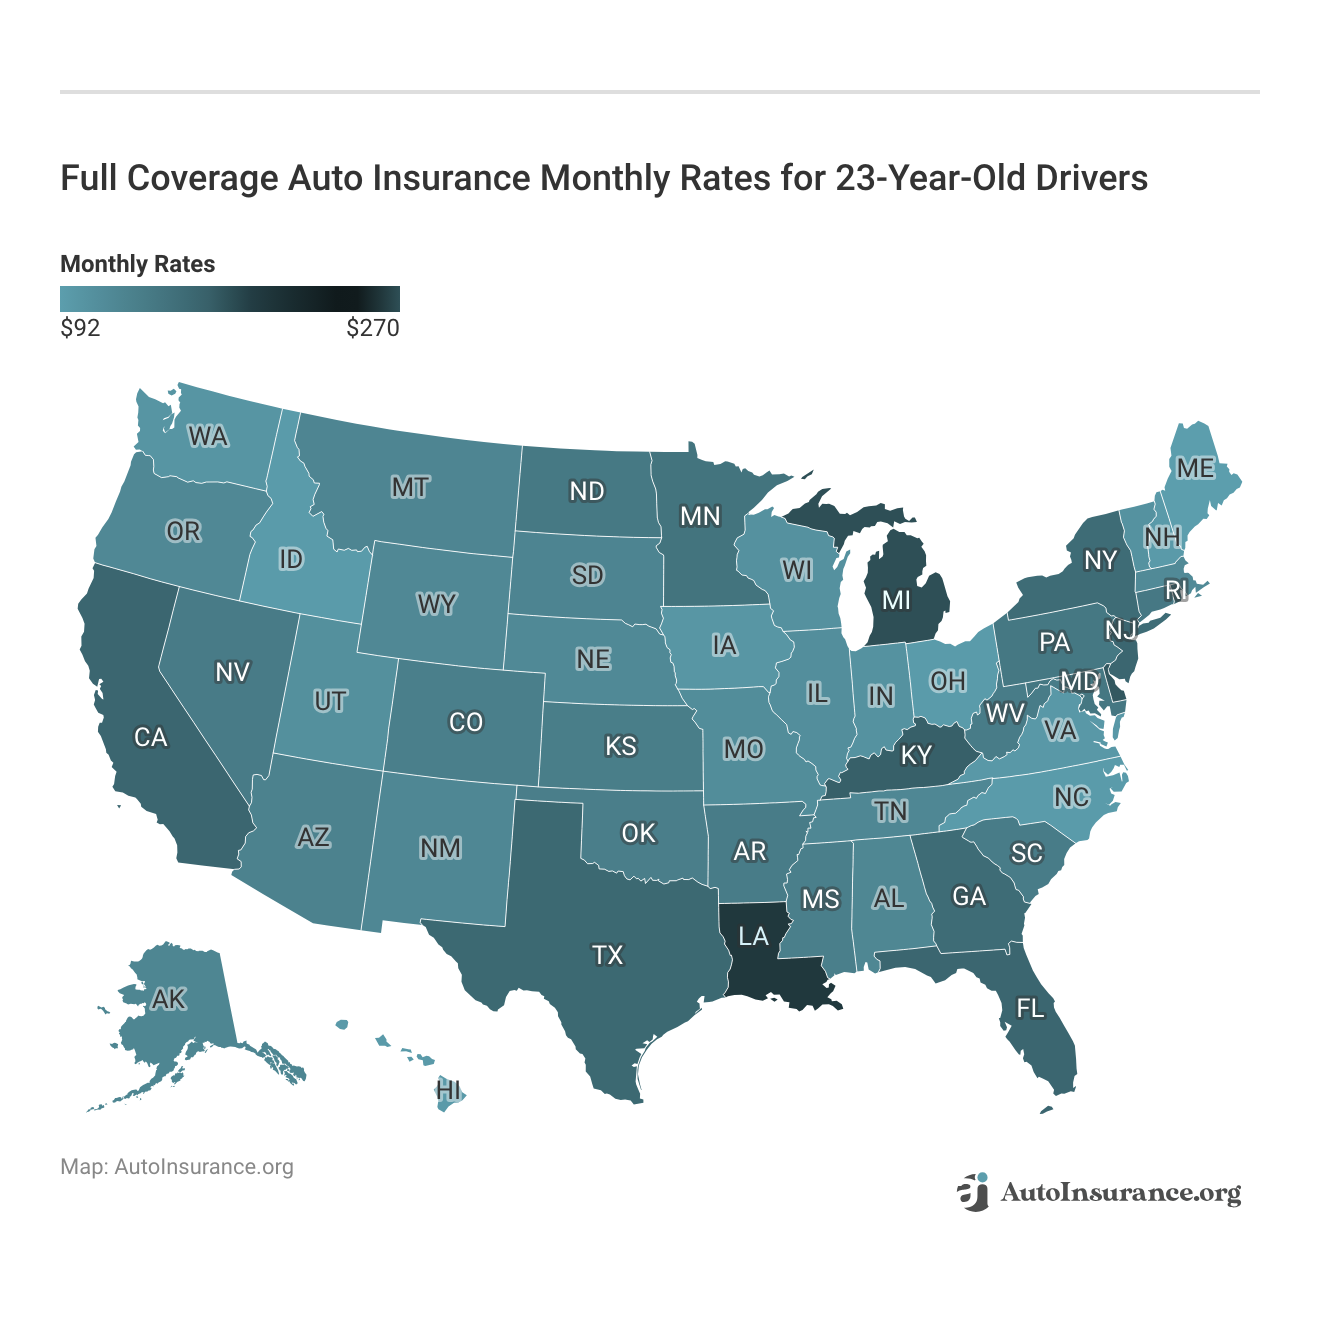 <h3>Full Coverage Auto Insurance Monthly Rates for 23-Year-Old Drivers</h3>